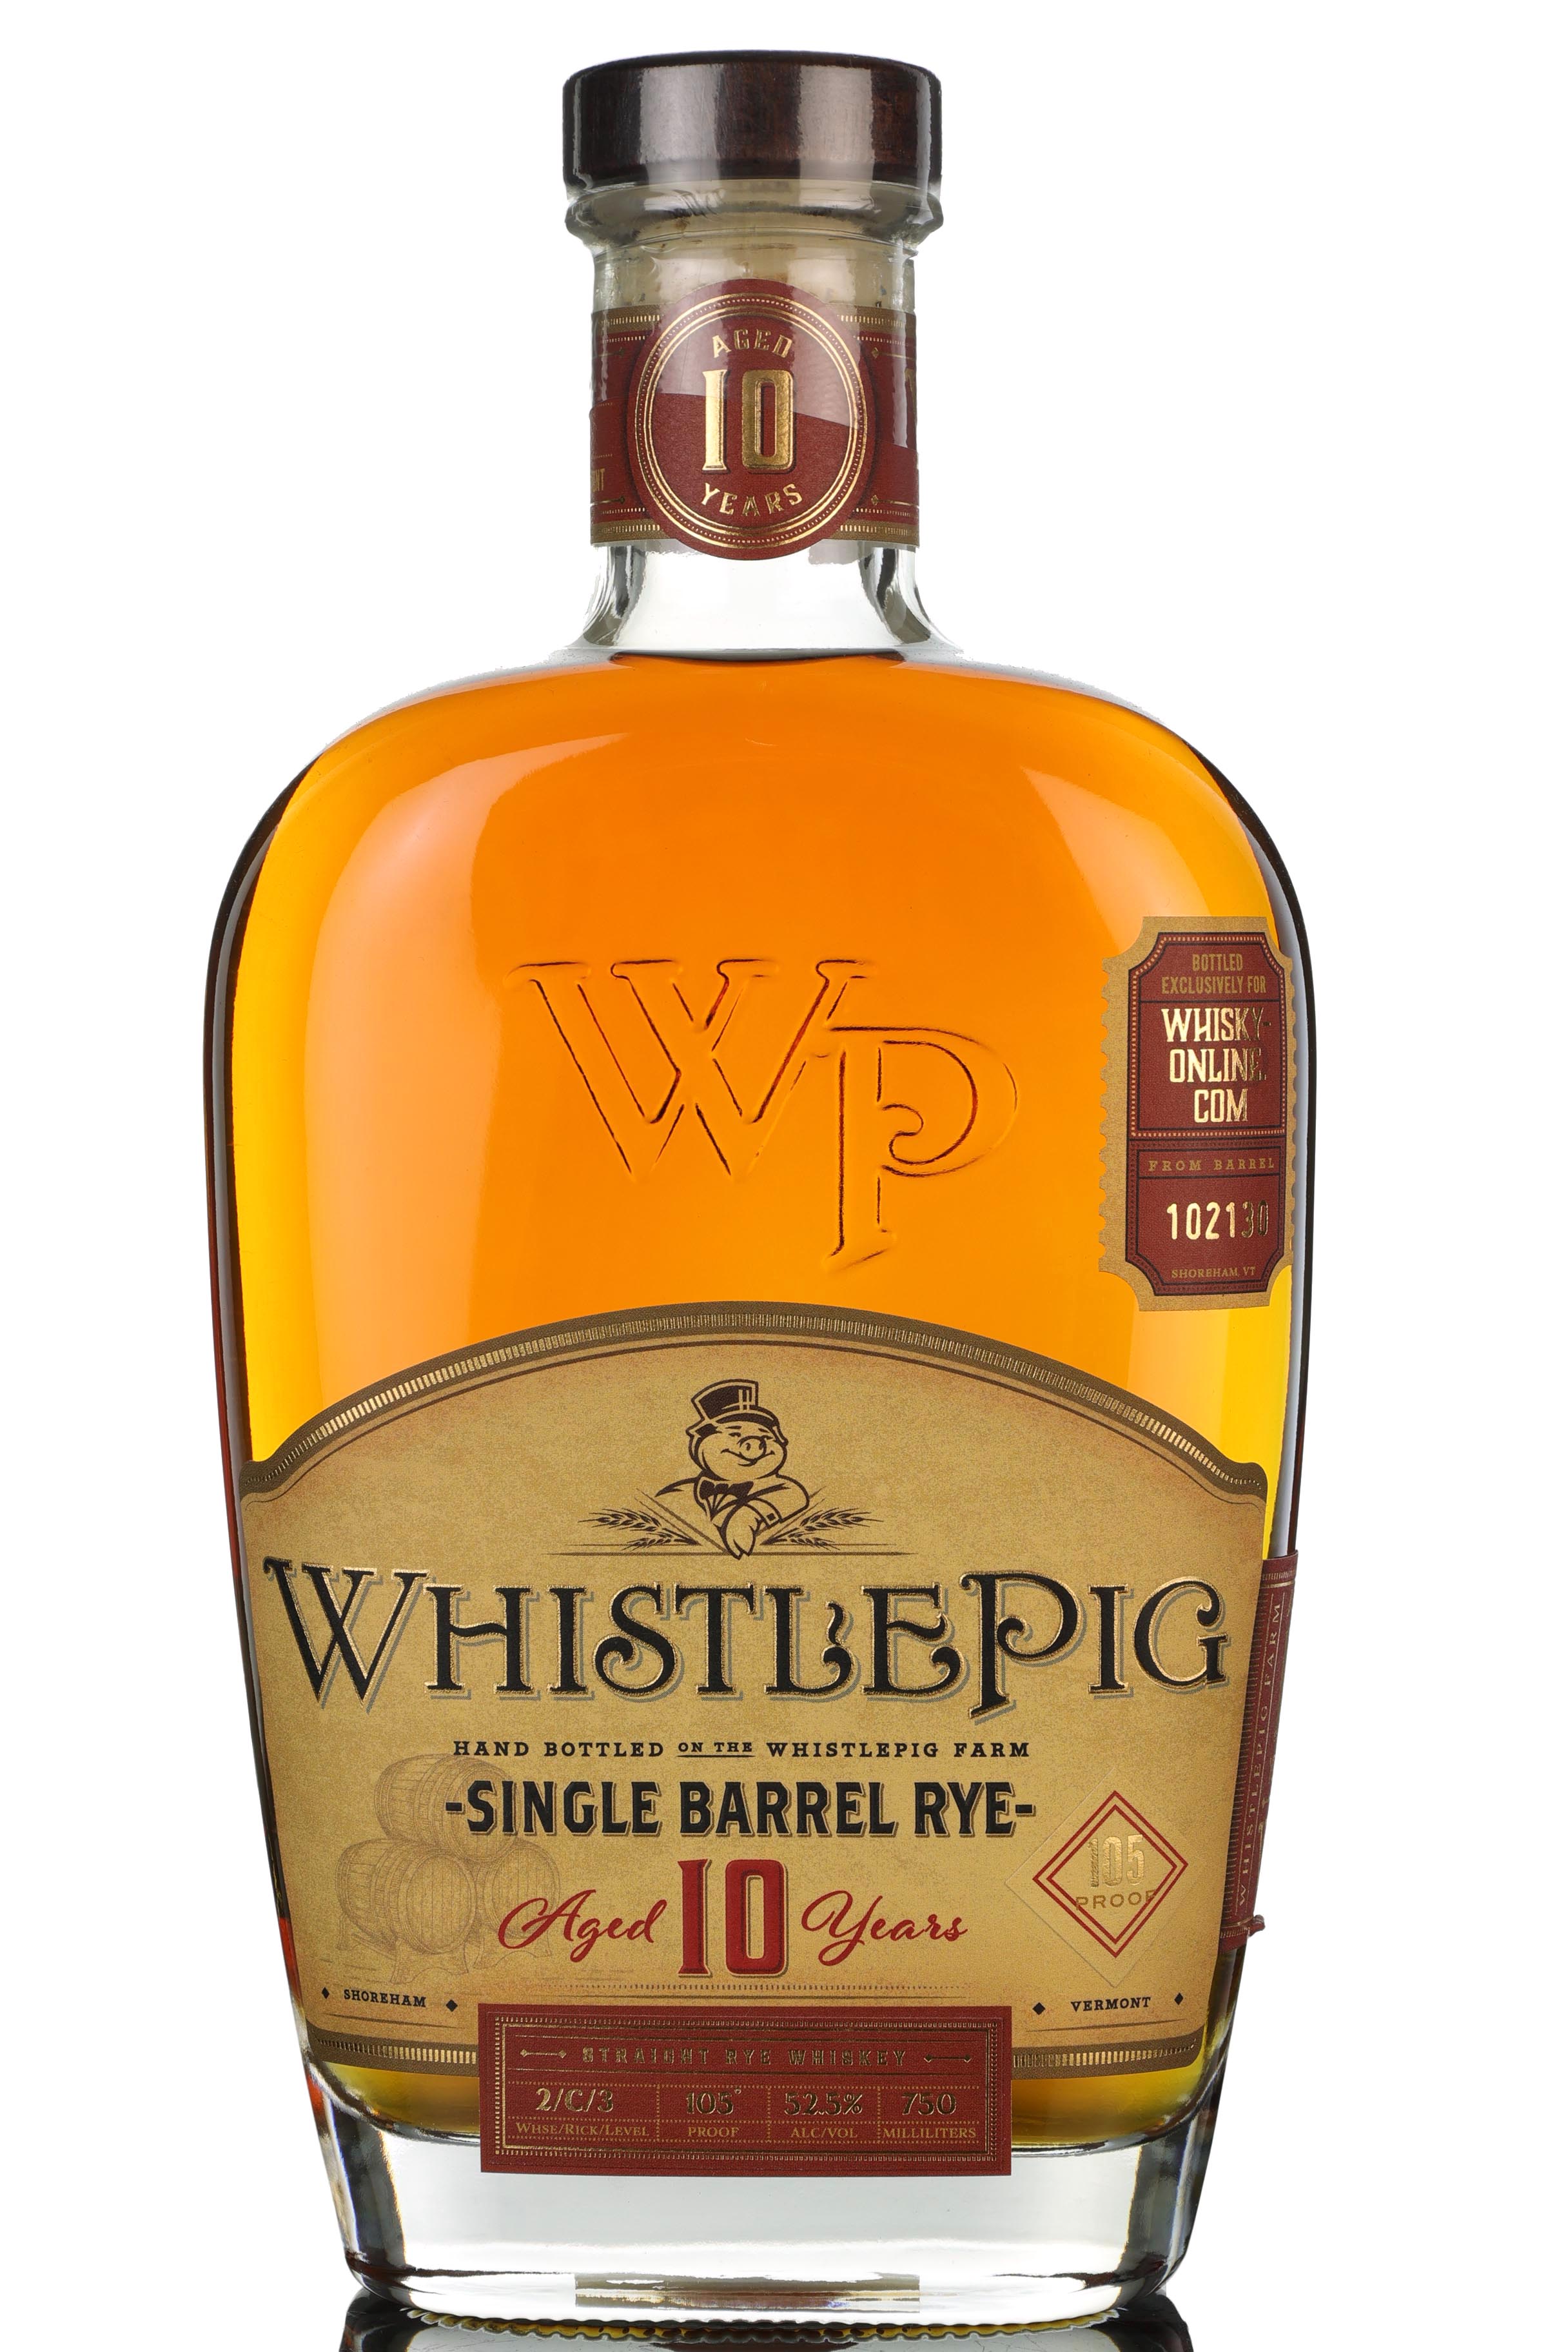 WhistlePig 10 Year Old - Single Barrel 102130 - 2020 Release - Whisky-Online Exclusive